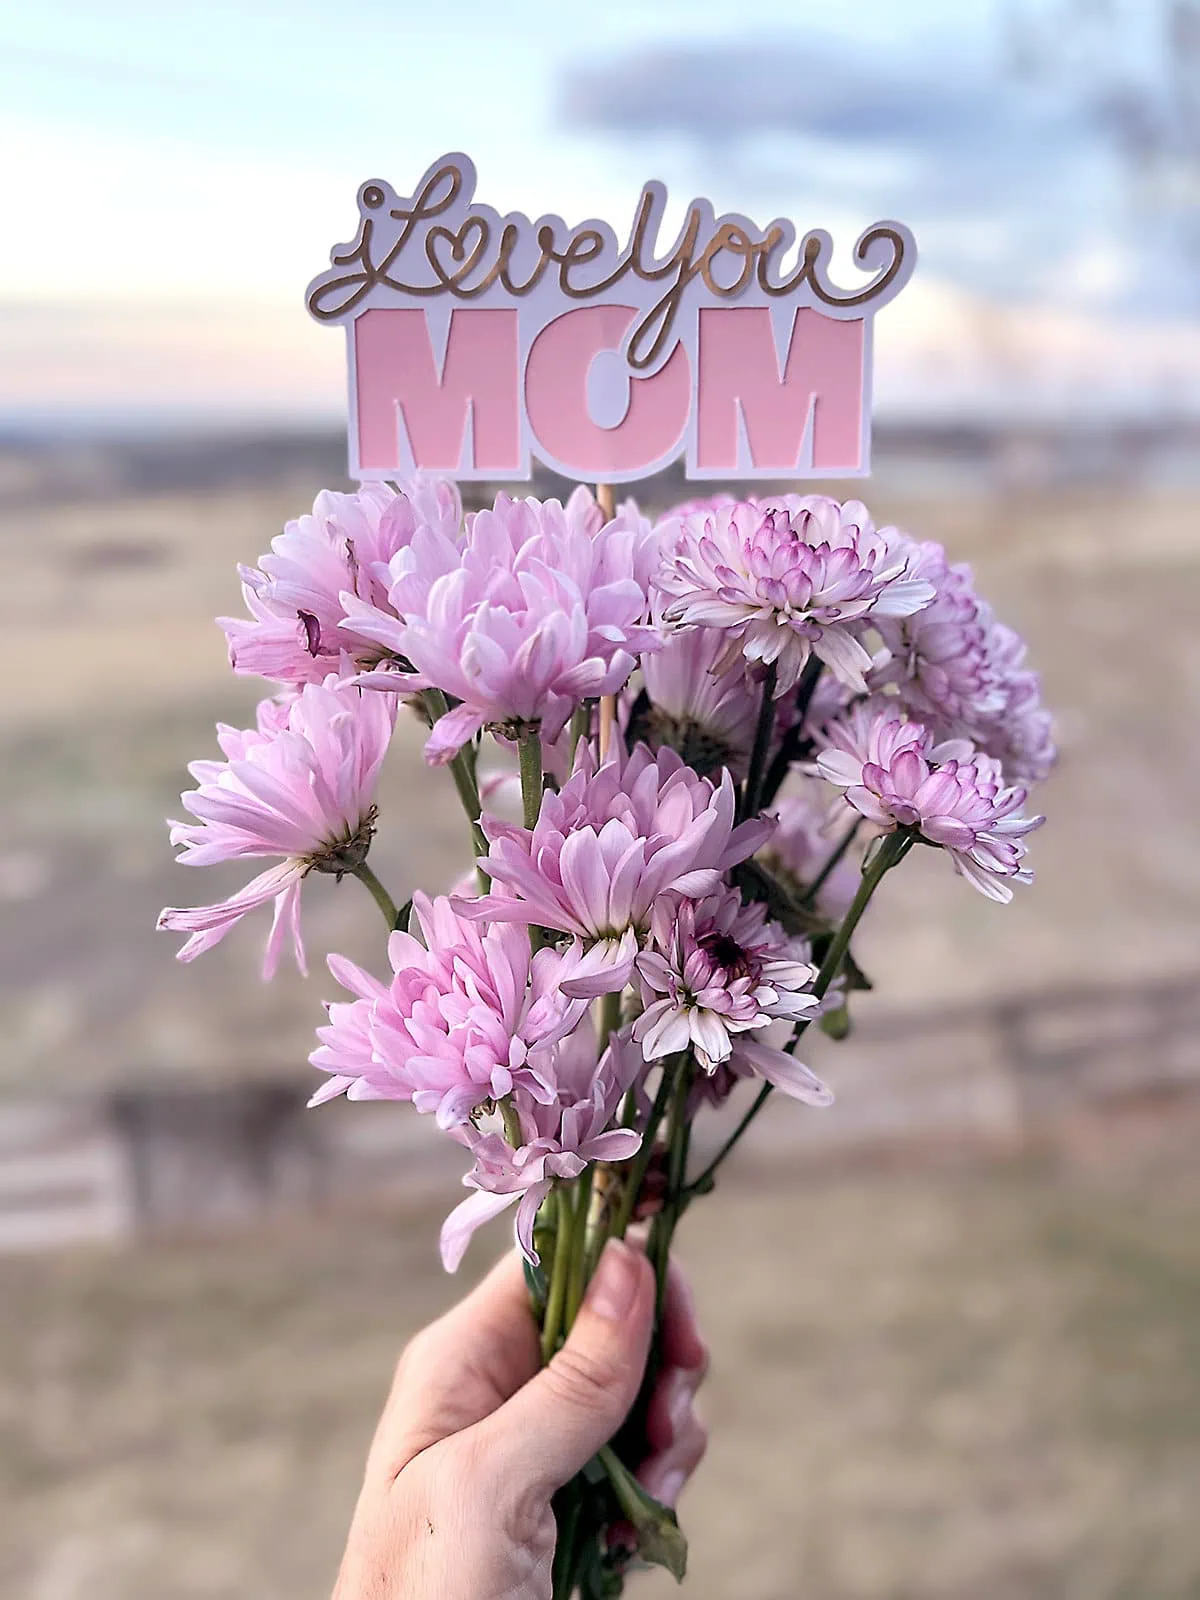 I Love You Mom SVG cut file designed by Jen Goode in a little bouquet of flowers